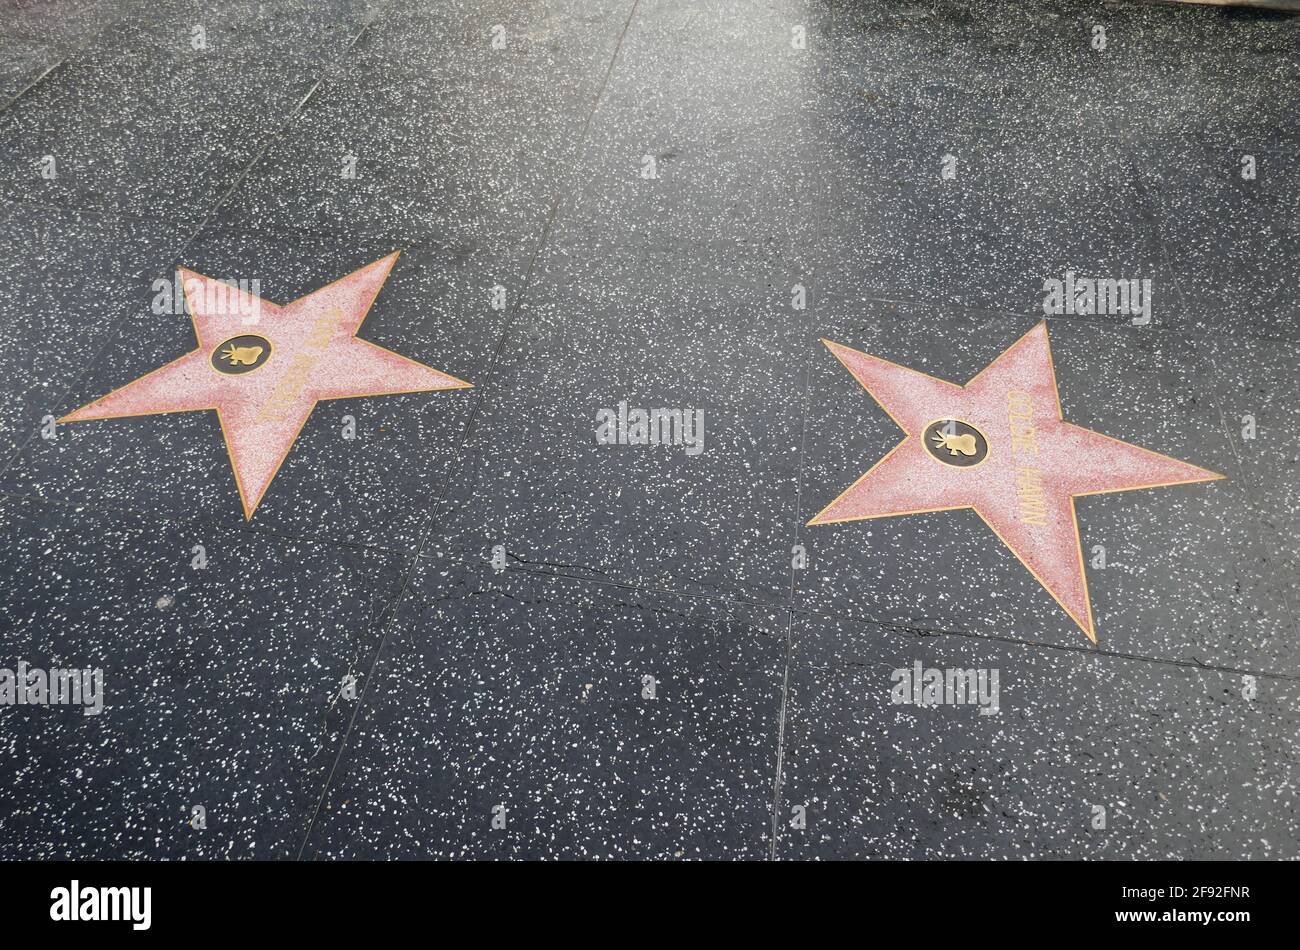 Hollywood, California, USA 14th April 2021 A general view of atmosphere of actor Kurt Russell's Star and actress Goldie Hawn's Star on the Hollywood Walk of Fame on April 14, 2021 in Hollywood, California, USA. Photo by Barry King/Alamy Stock Photo Stock Photo